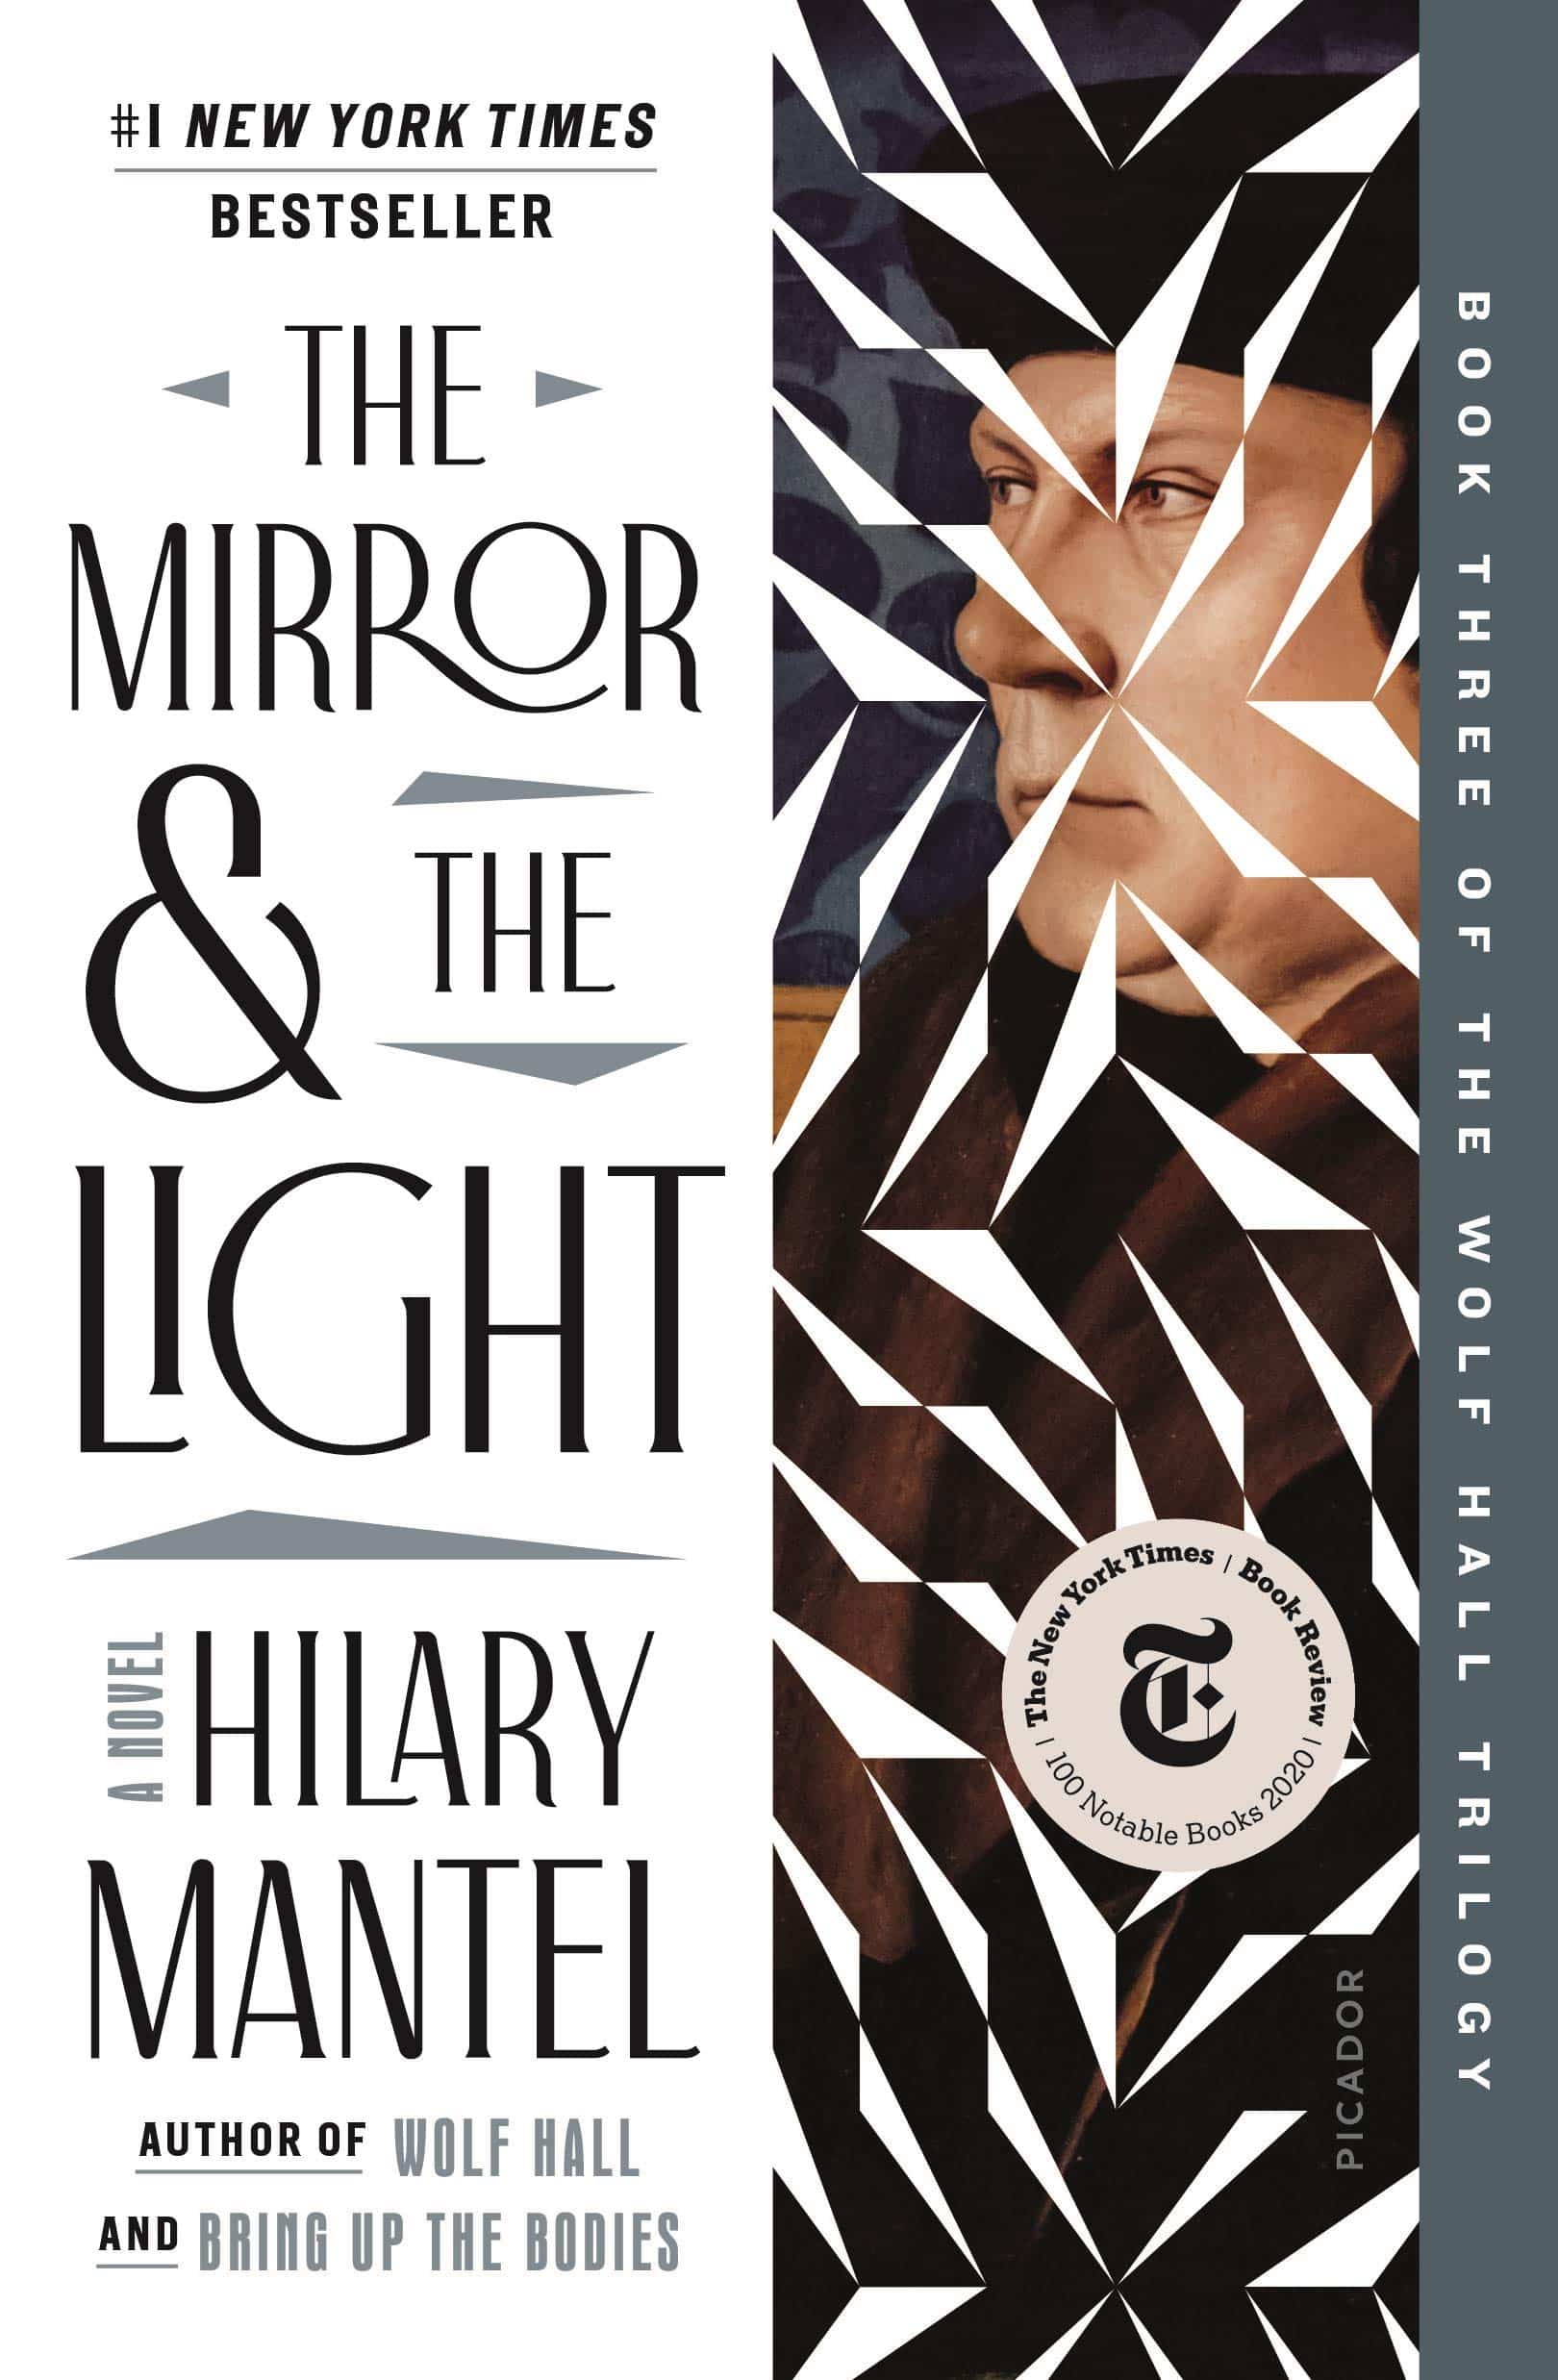 The cover of The Mirror & the Light